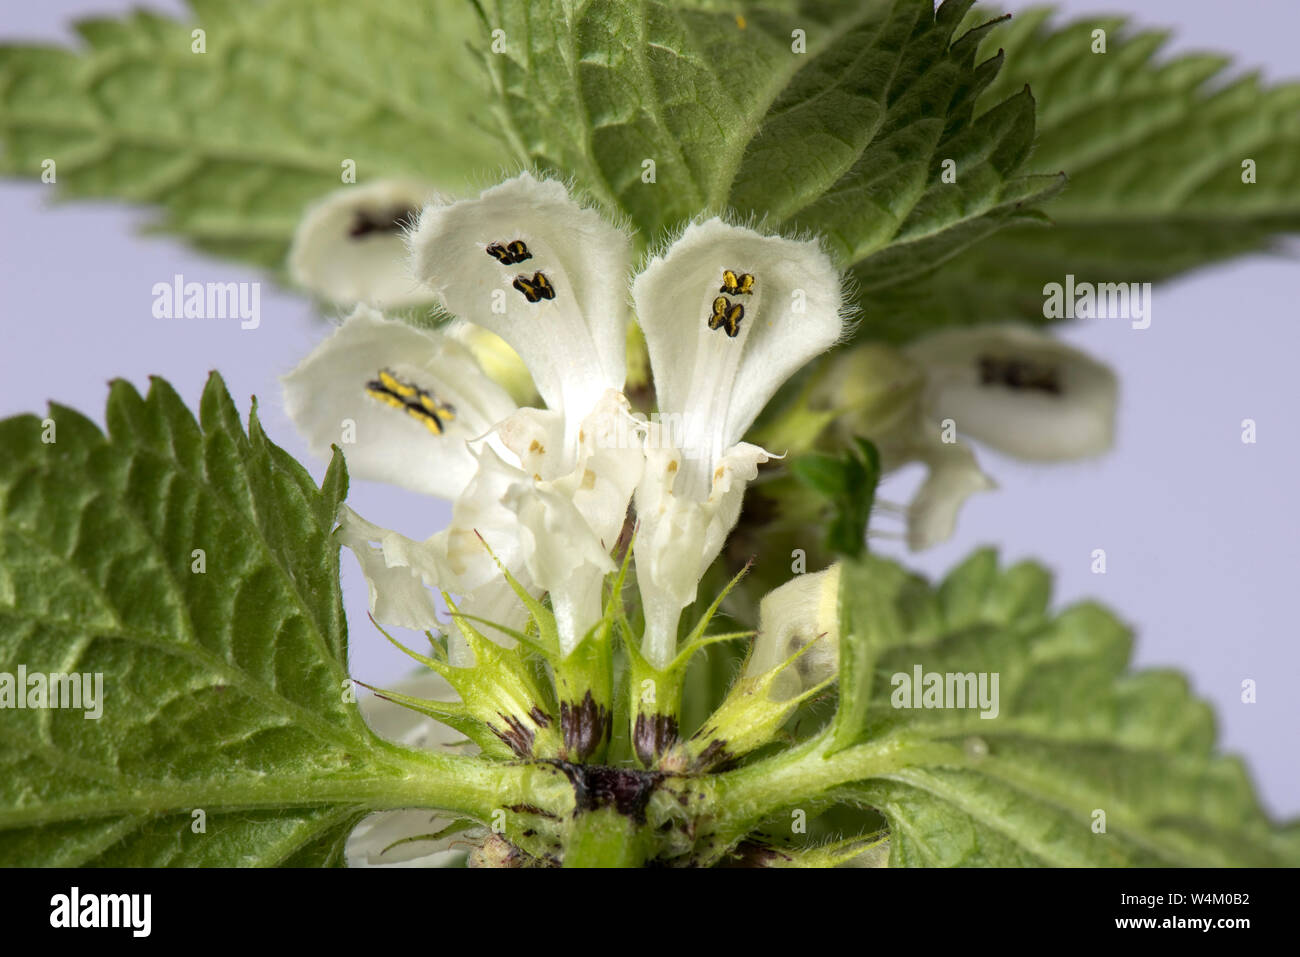 Flower whorl and leaves of white dead-nettle (Lamium album) showing anthers, shape and structure, Stock Photo